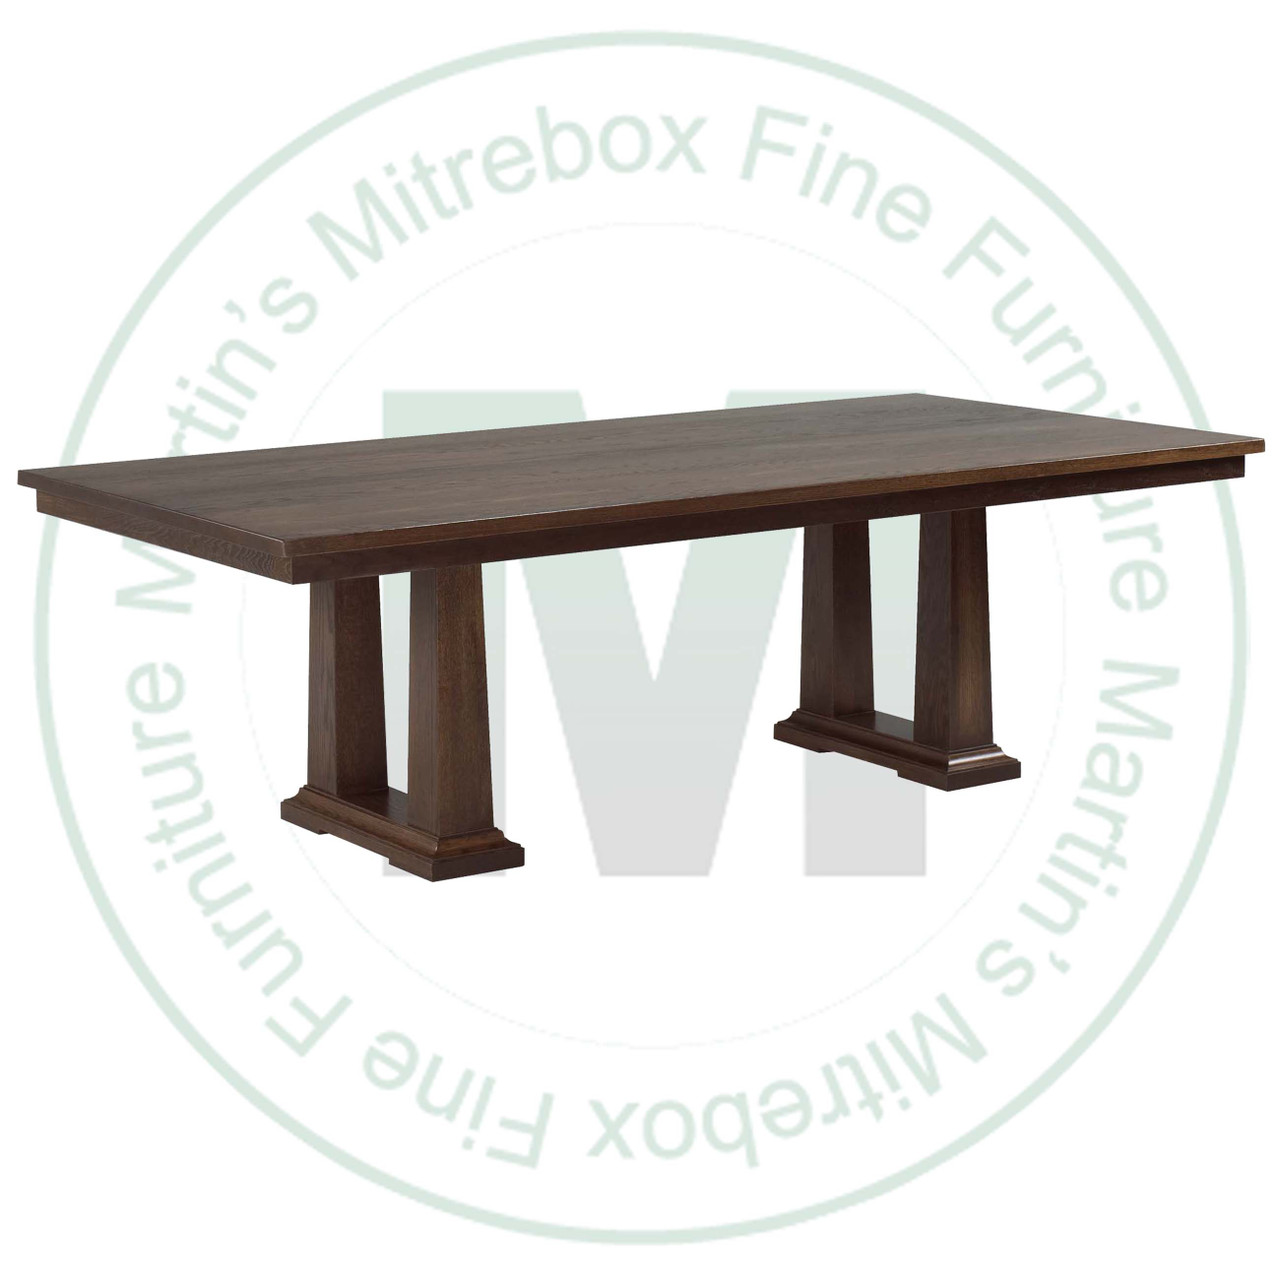 Maple Acropolis Extension Double Pedestal Table 54''D x 96''W x 30''H With 4 - 12'' Leaves Table Has 1.25'' Thick Top